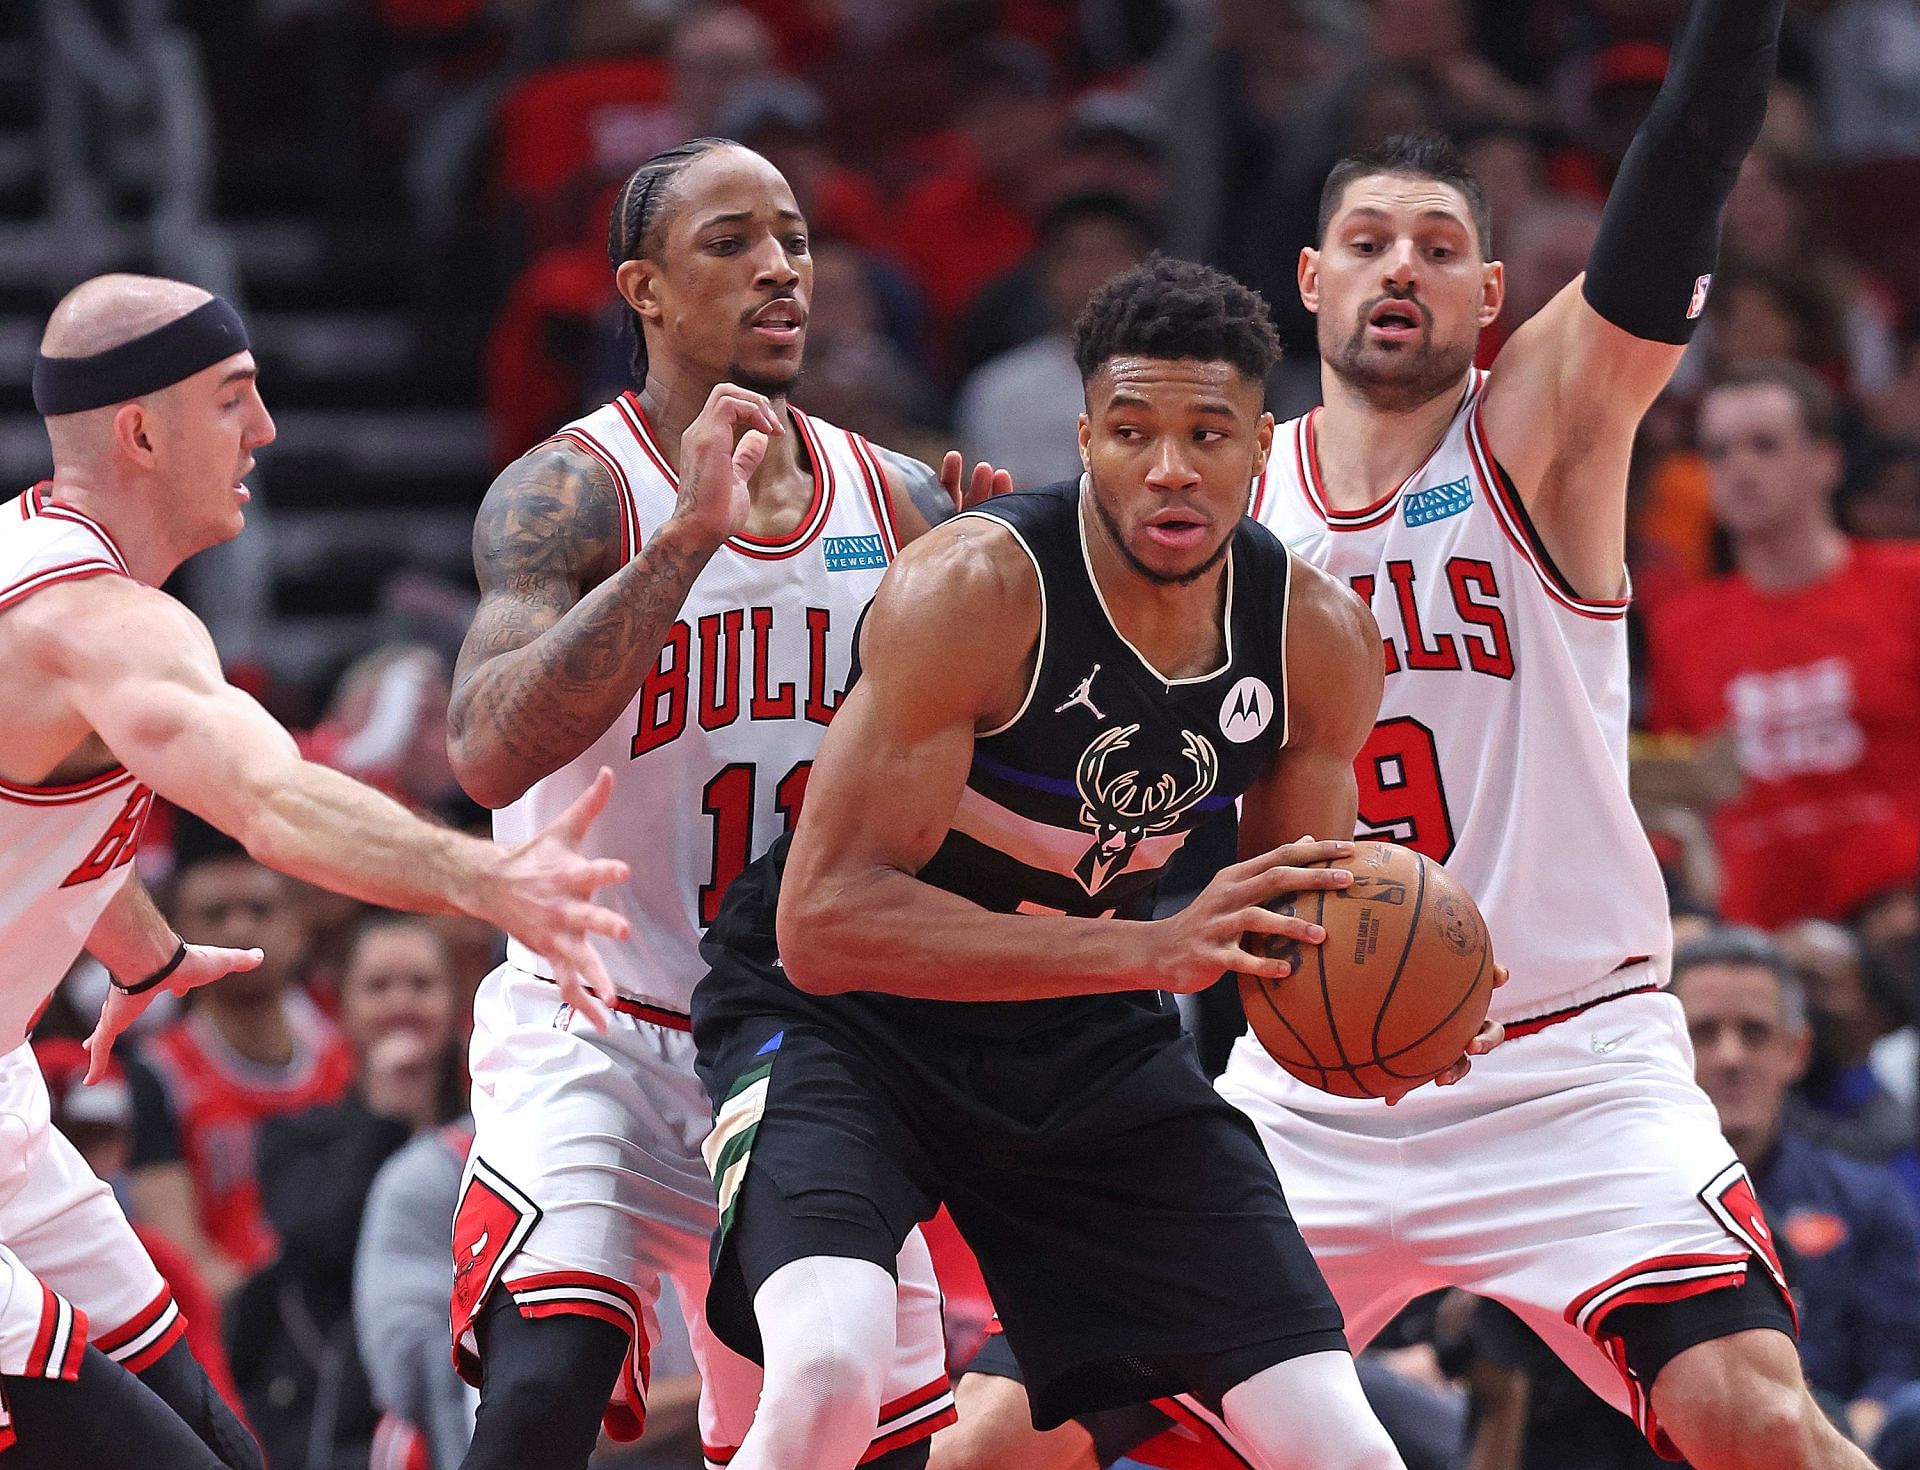 Giannis Antetokounmpo guarded by Chicago Bulls players in the NBA playoffs.